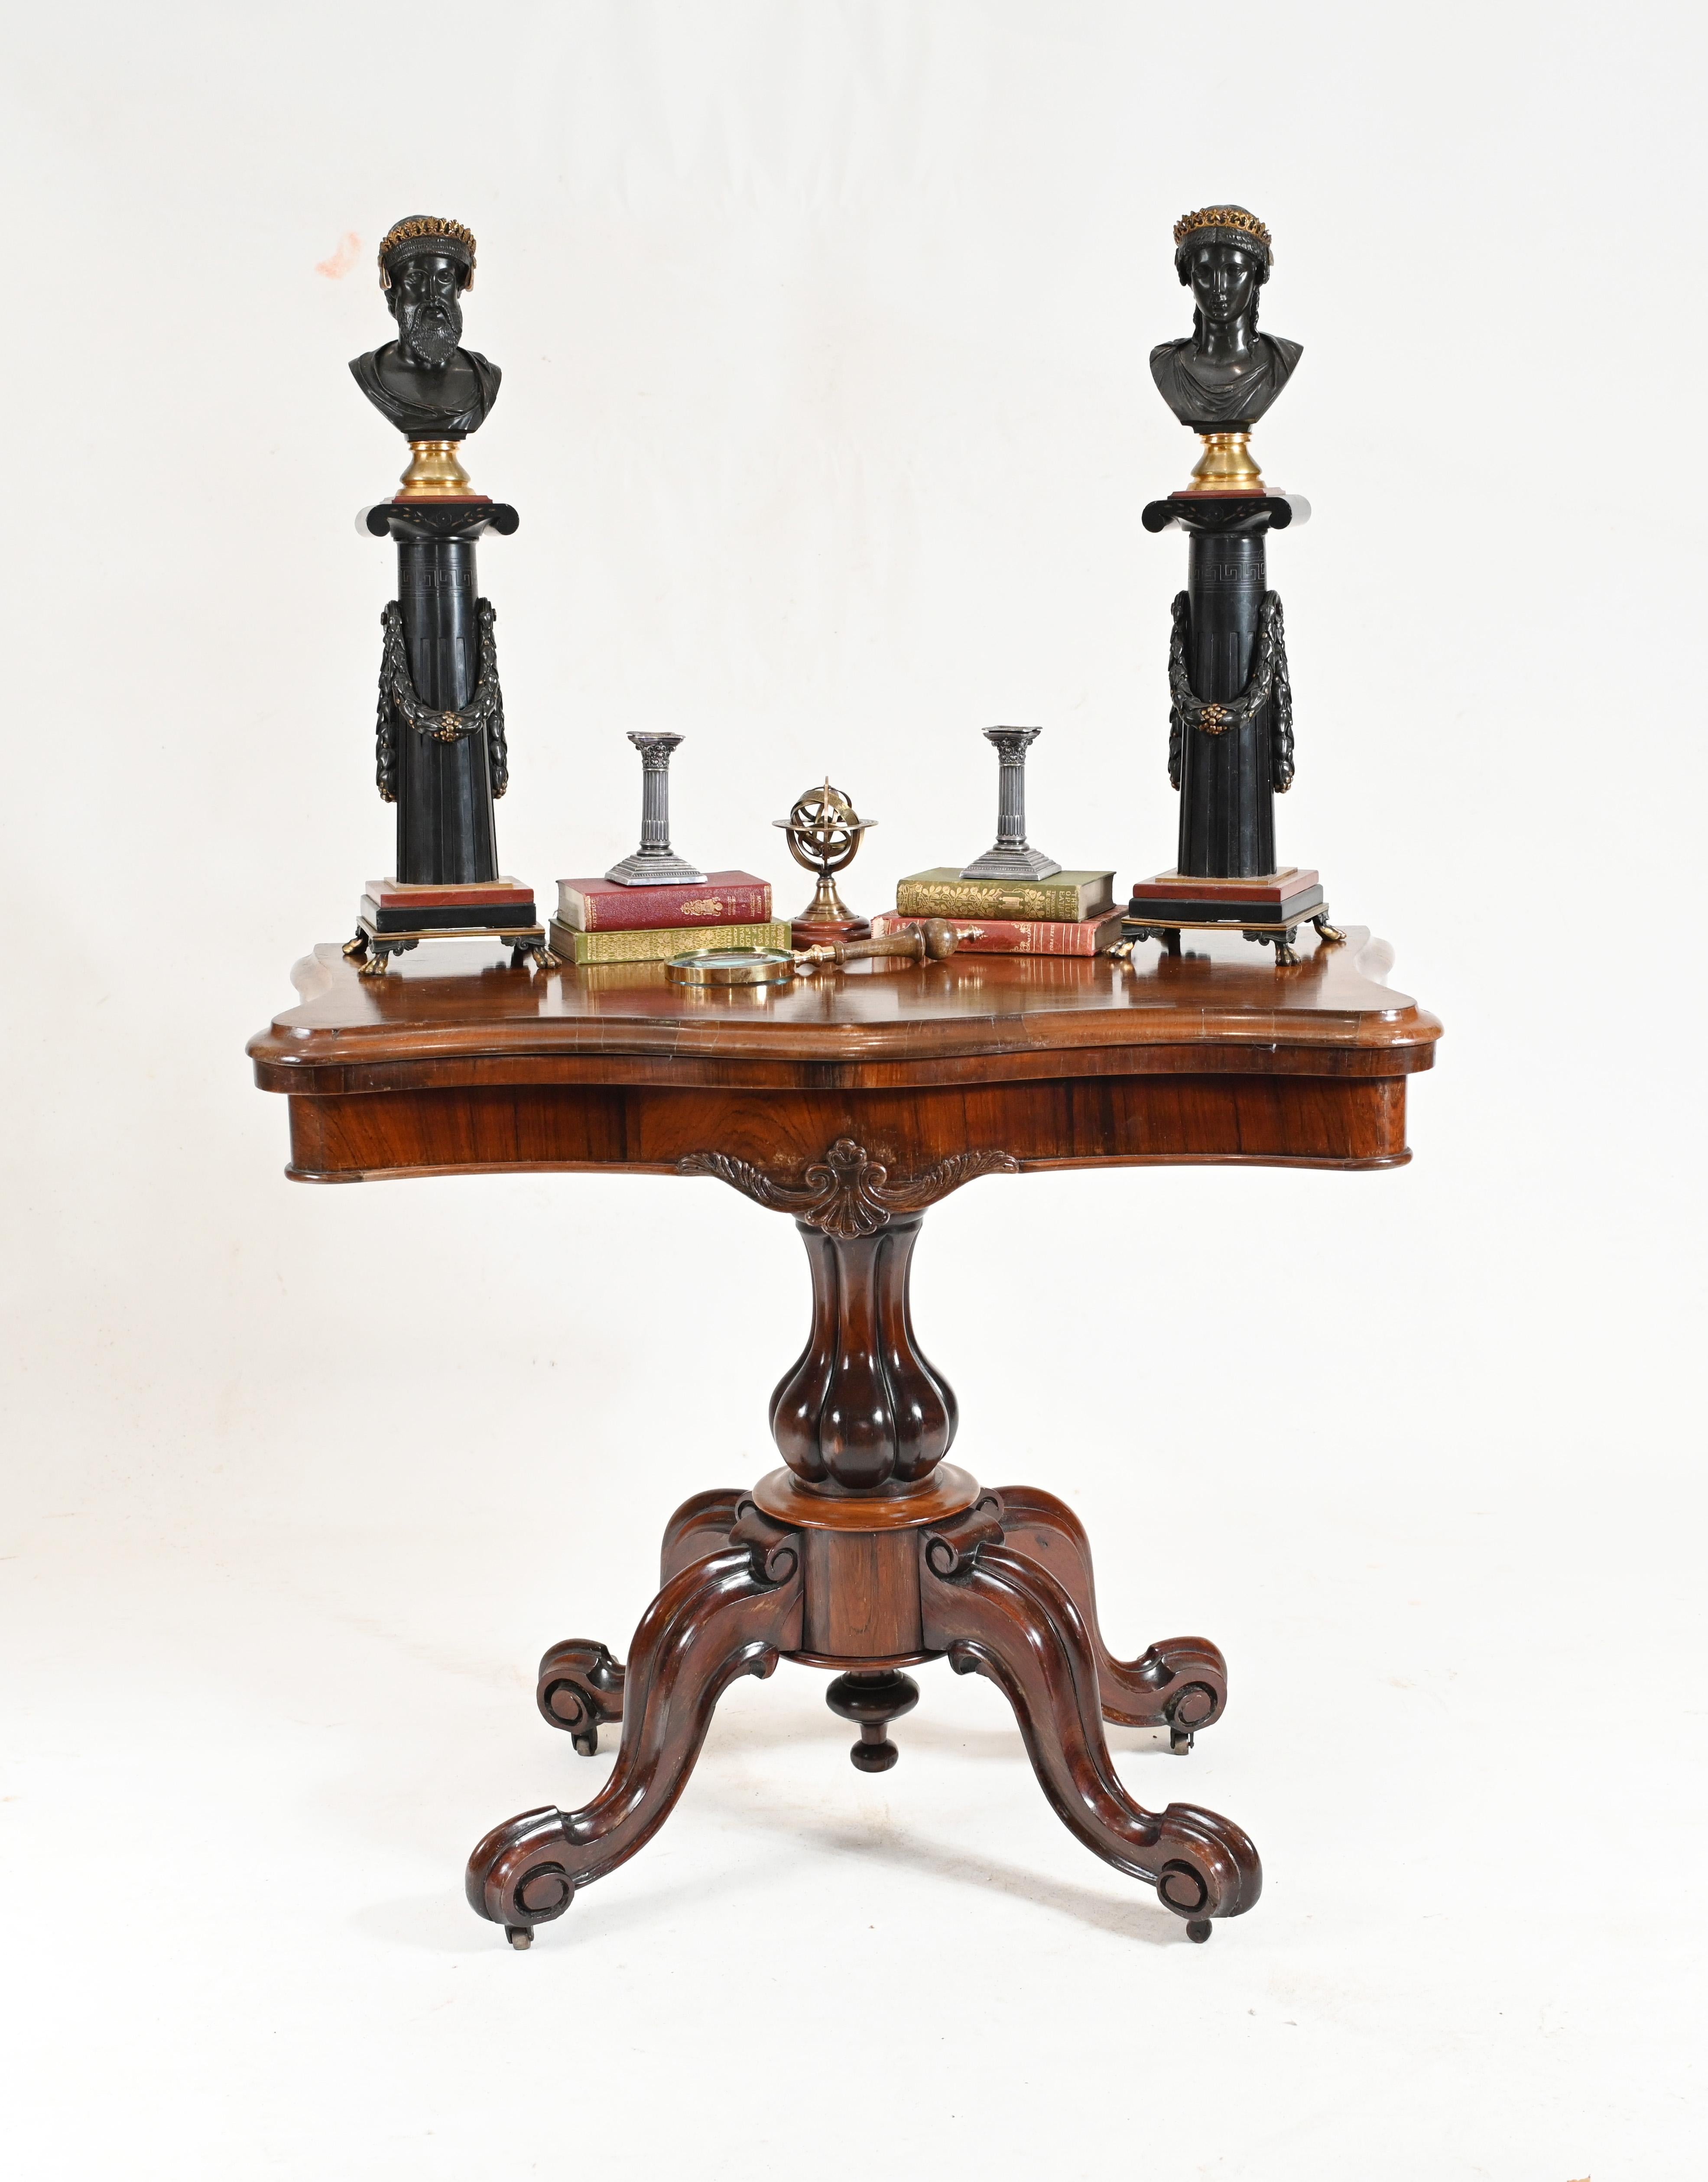 Elegant period Victorian games table in rosewood
We date this to circa 1860
Top opens out to reveal green beize lined playing surface
We can ship to anywhere in the world 
Offered in great shape ready for home use right away